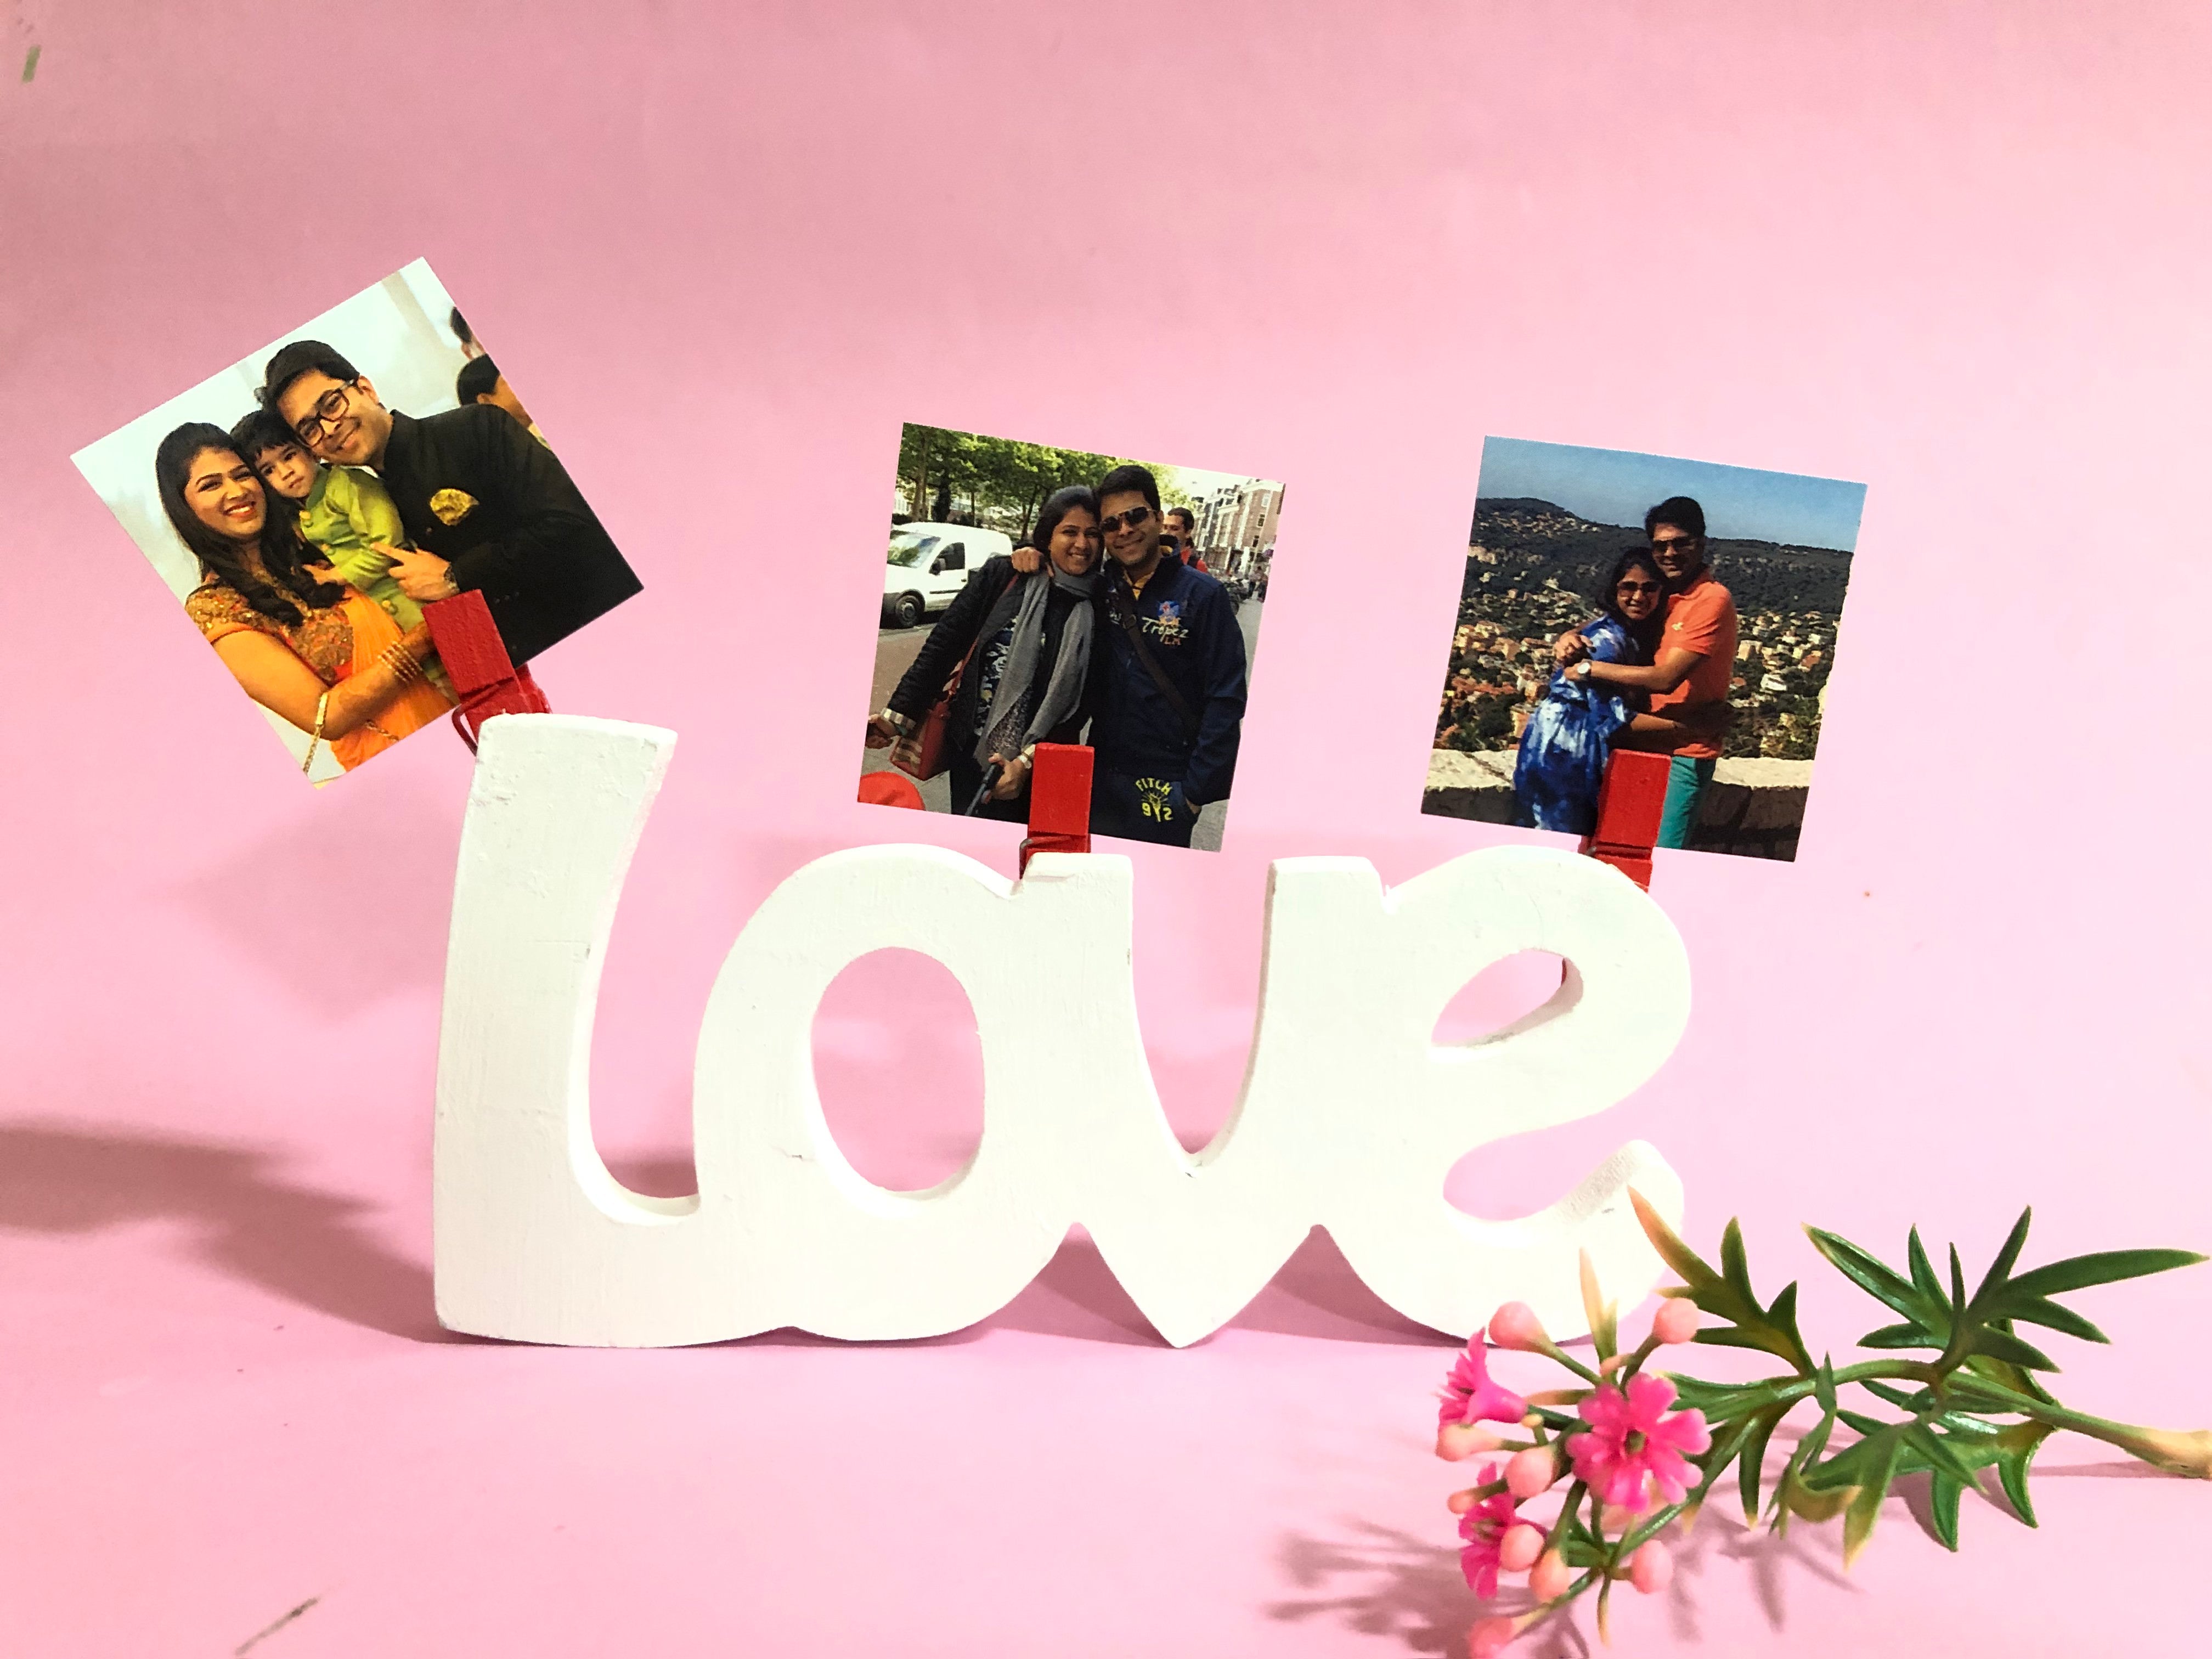 Wooden Stand with Pics for valentines day